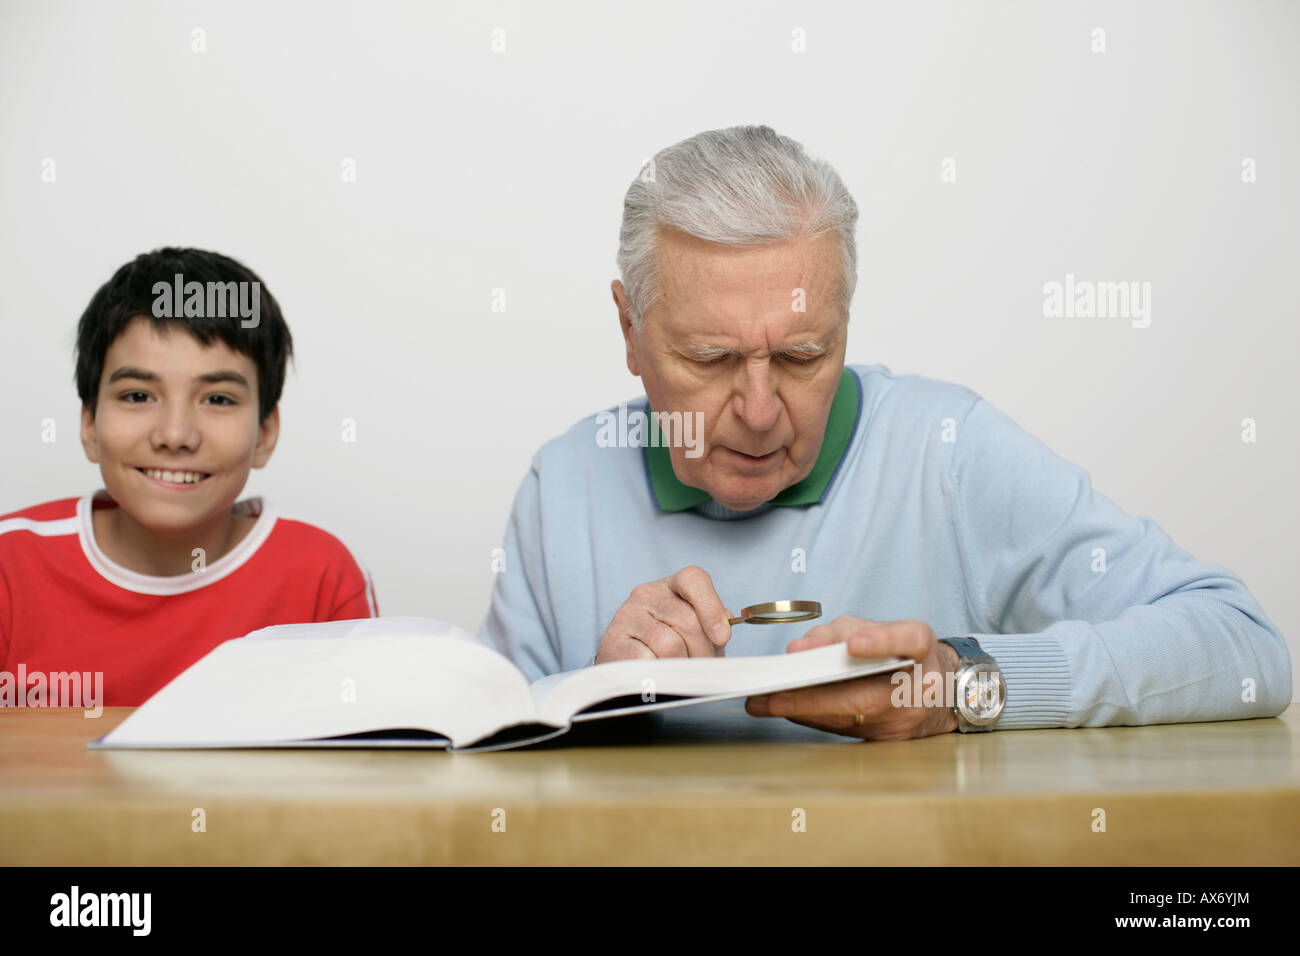 Grandfather using a magnifying glass to read a book, boy looking at camera, fully released Stock Photo